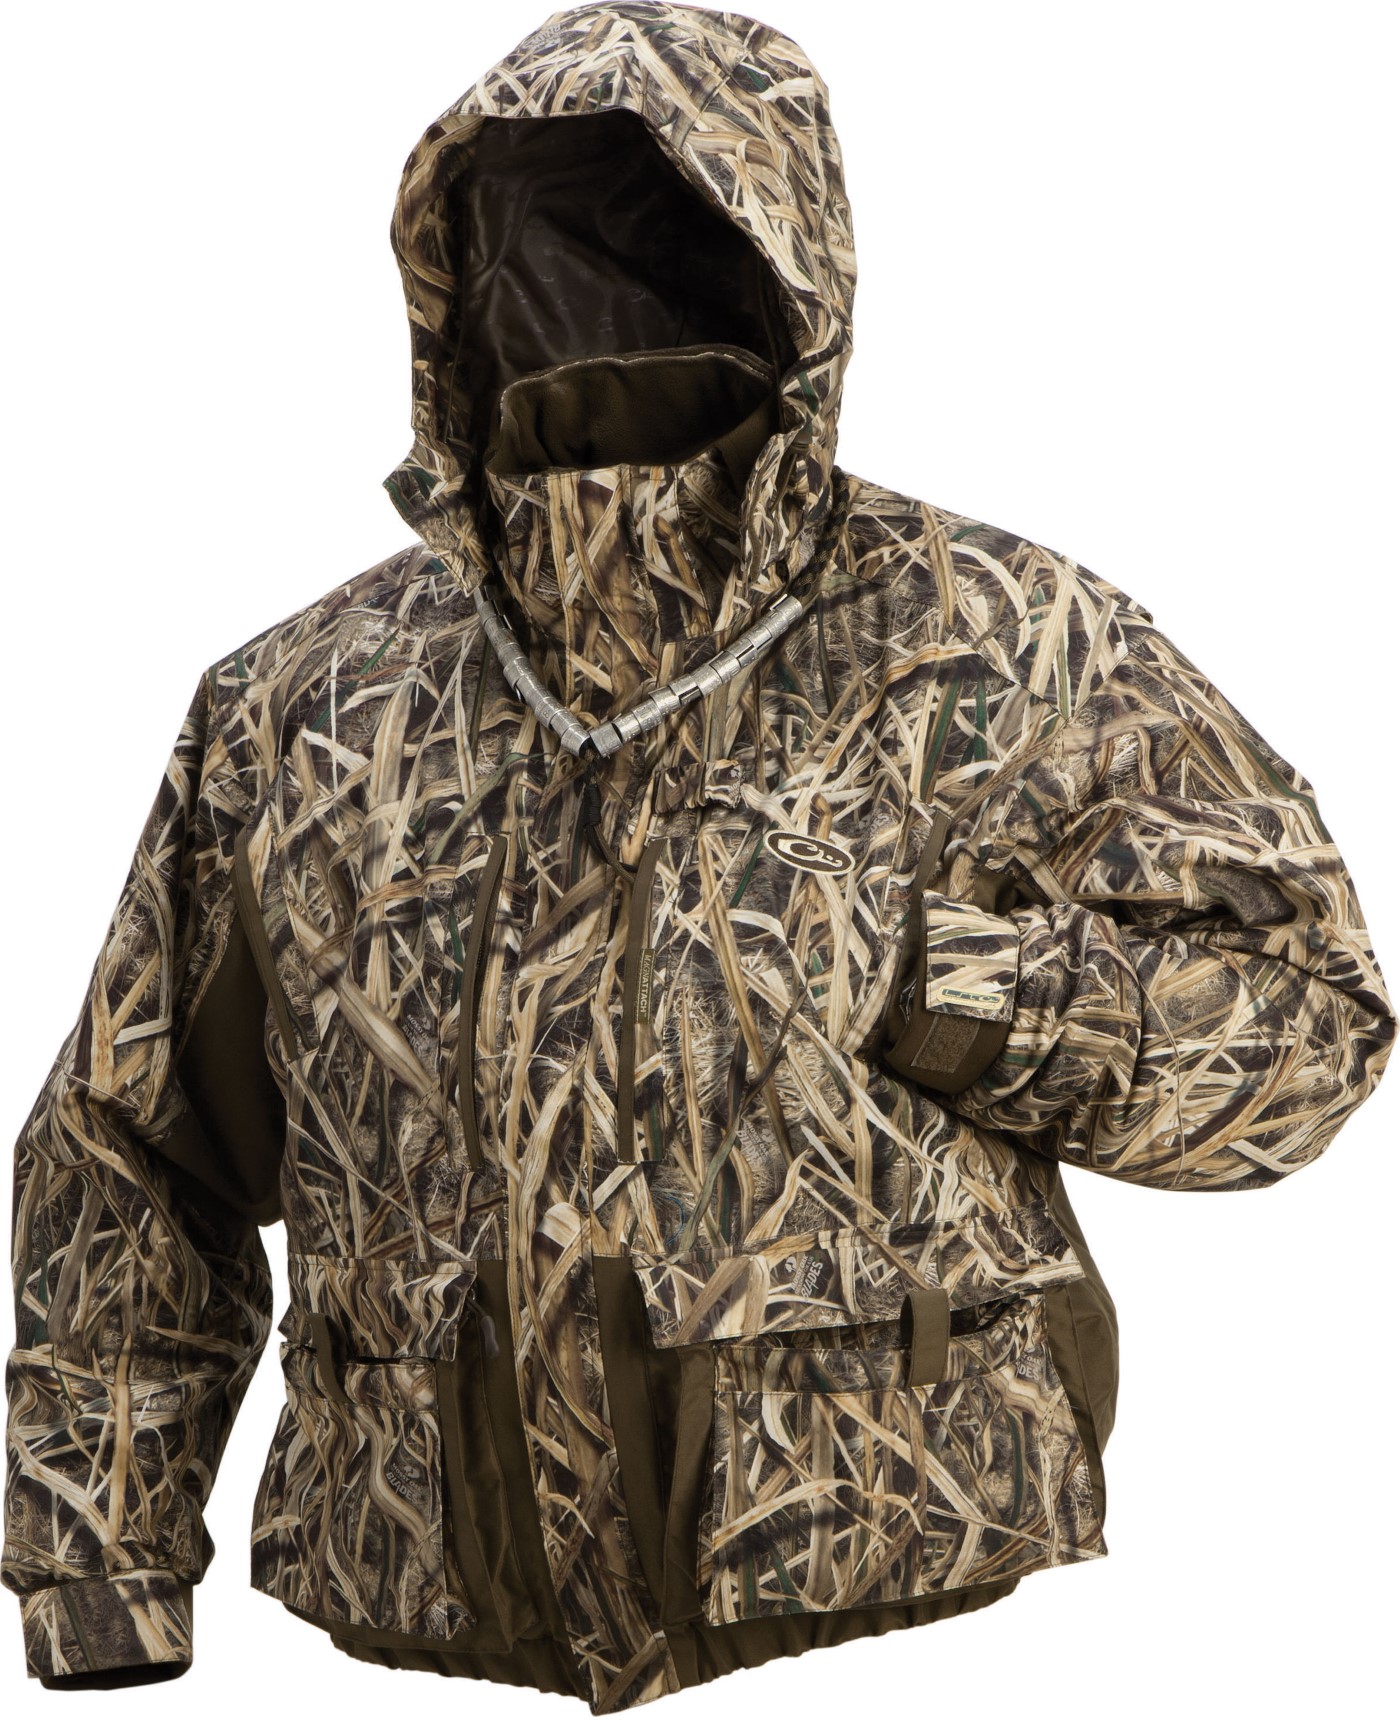 lst insulated waterfowler's jacket 2.0